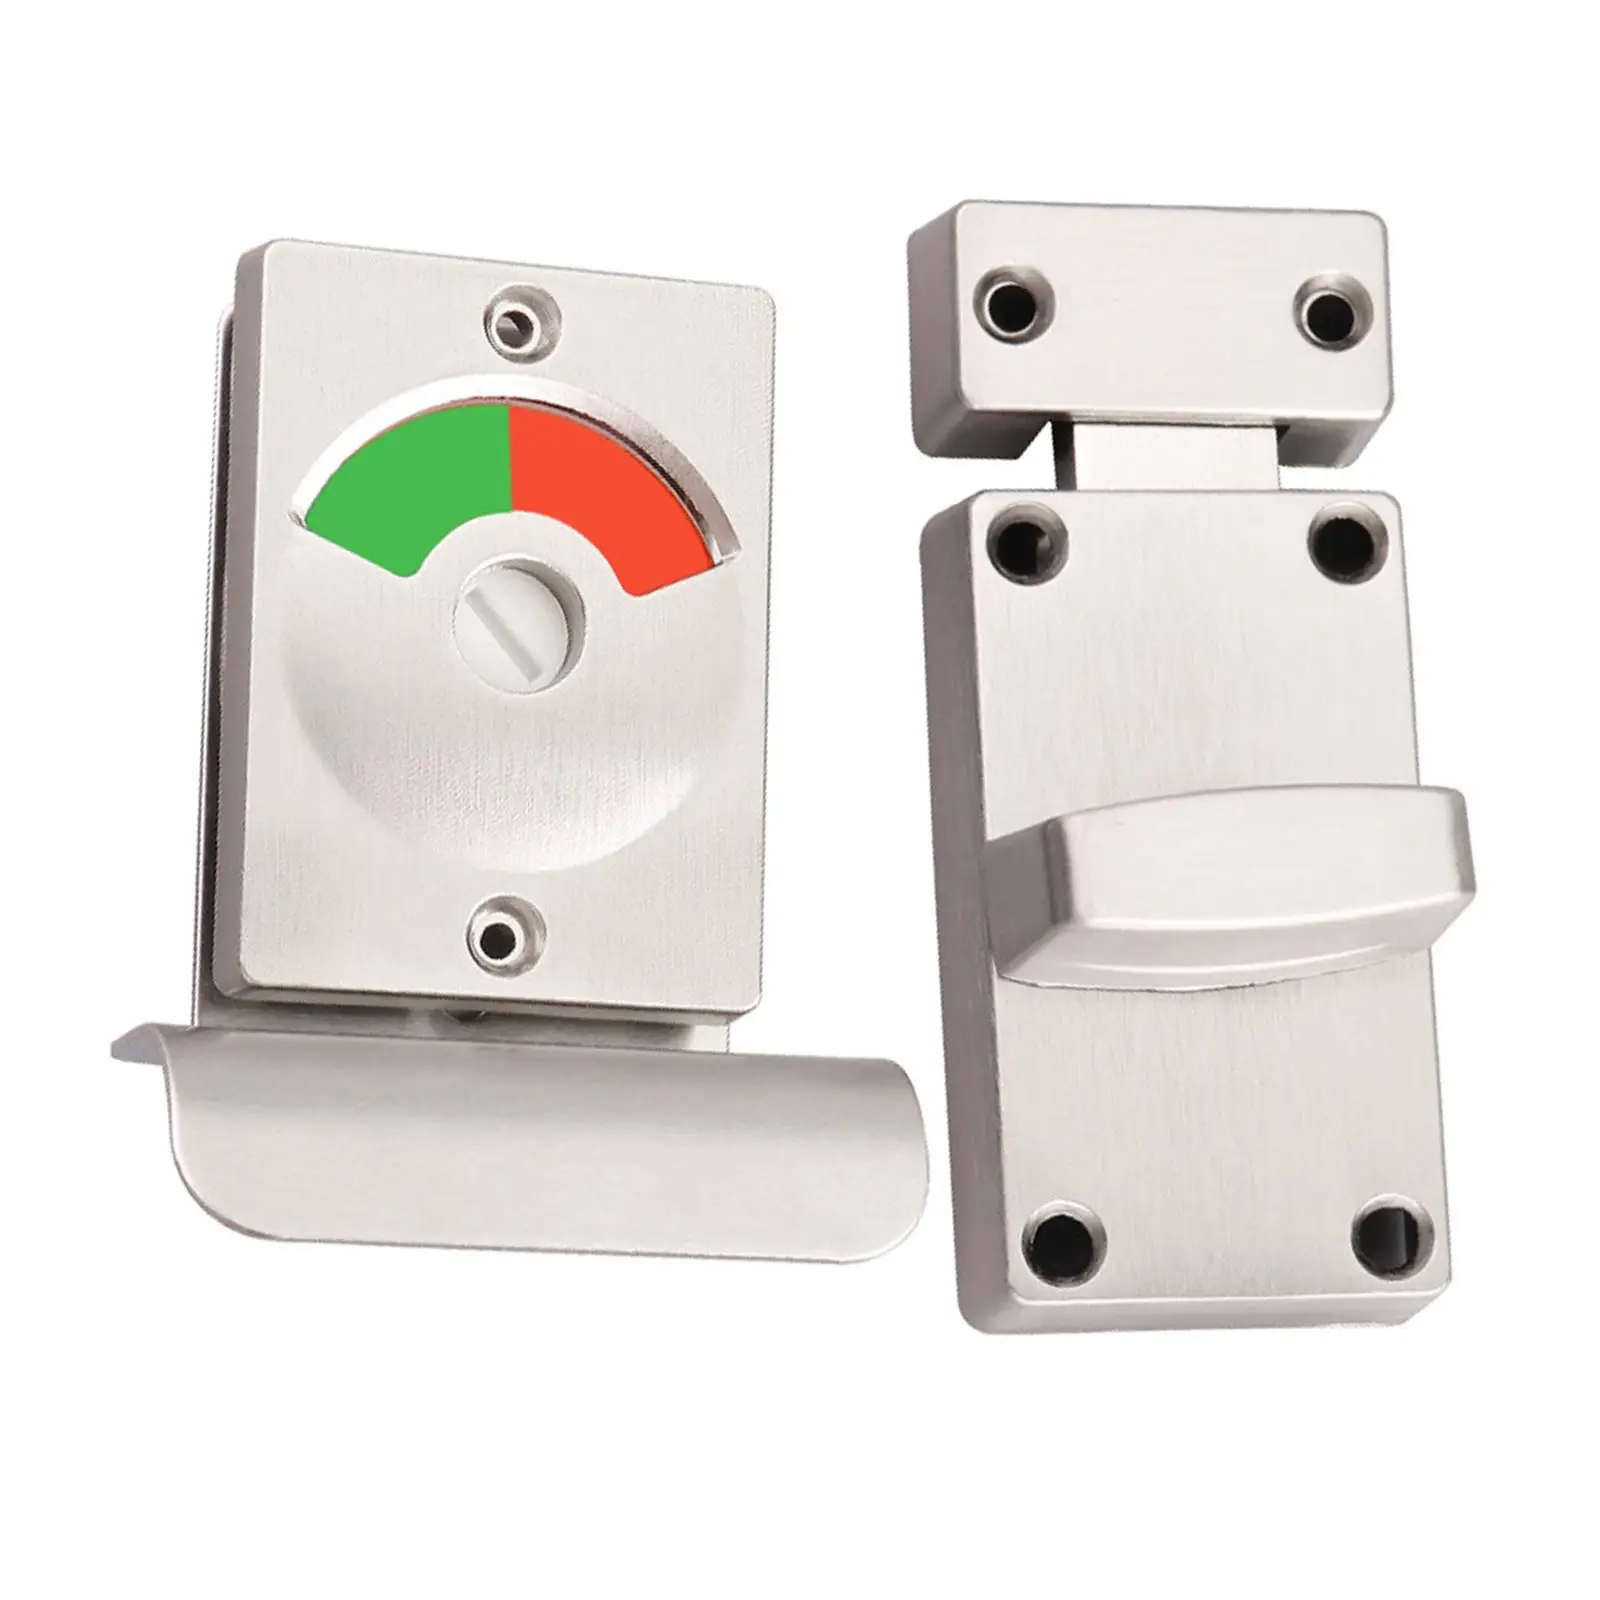 Green And Red Indicator Lock Inuse Or Vacant Lock for Office